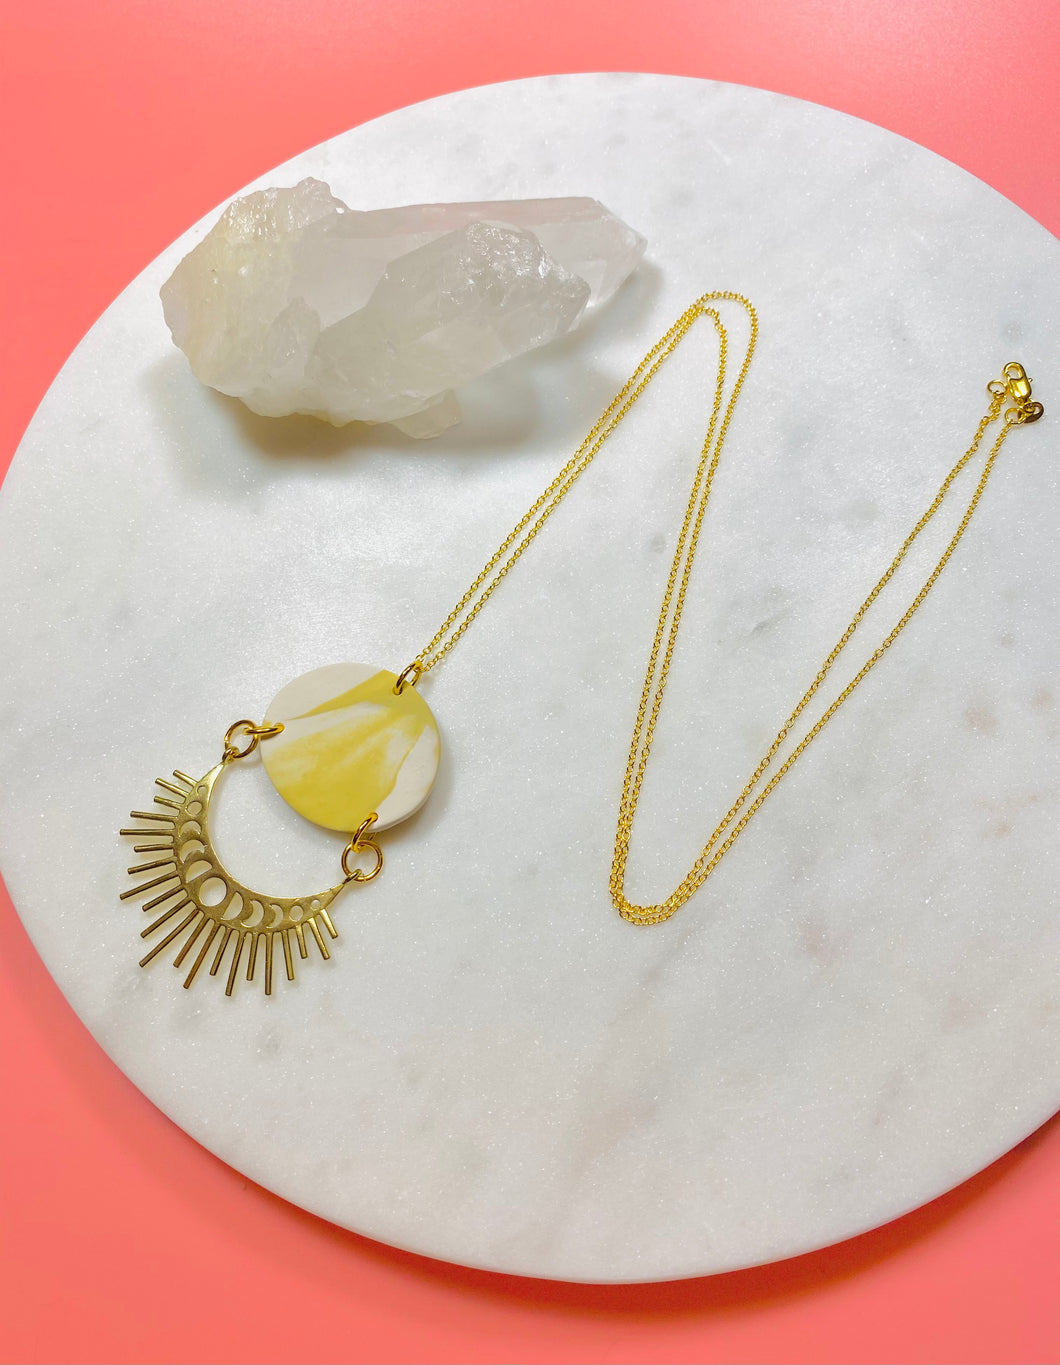 Chartreuse ‘Marble’ & Brass Moonphases Necklace